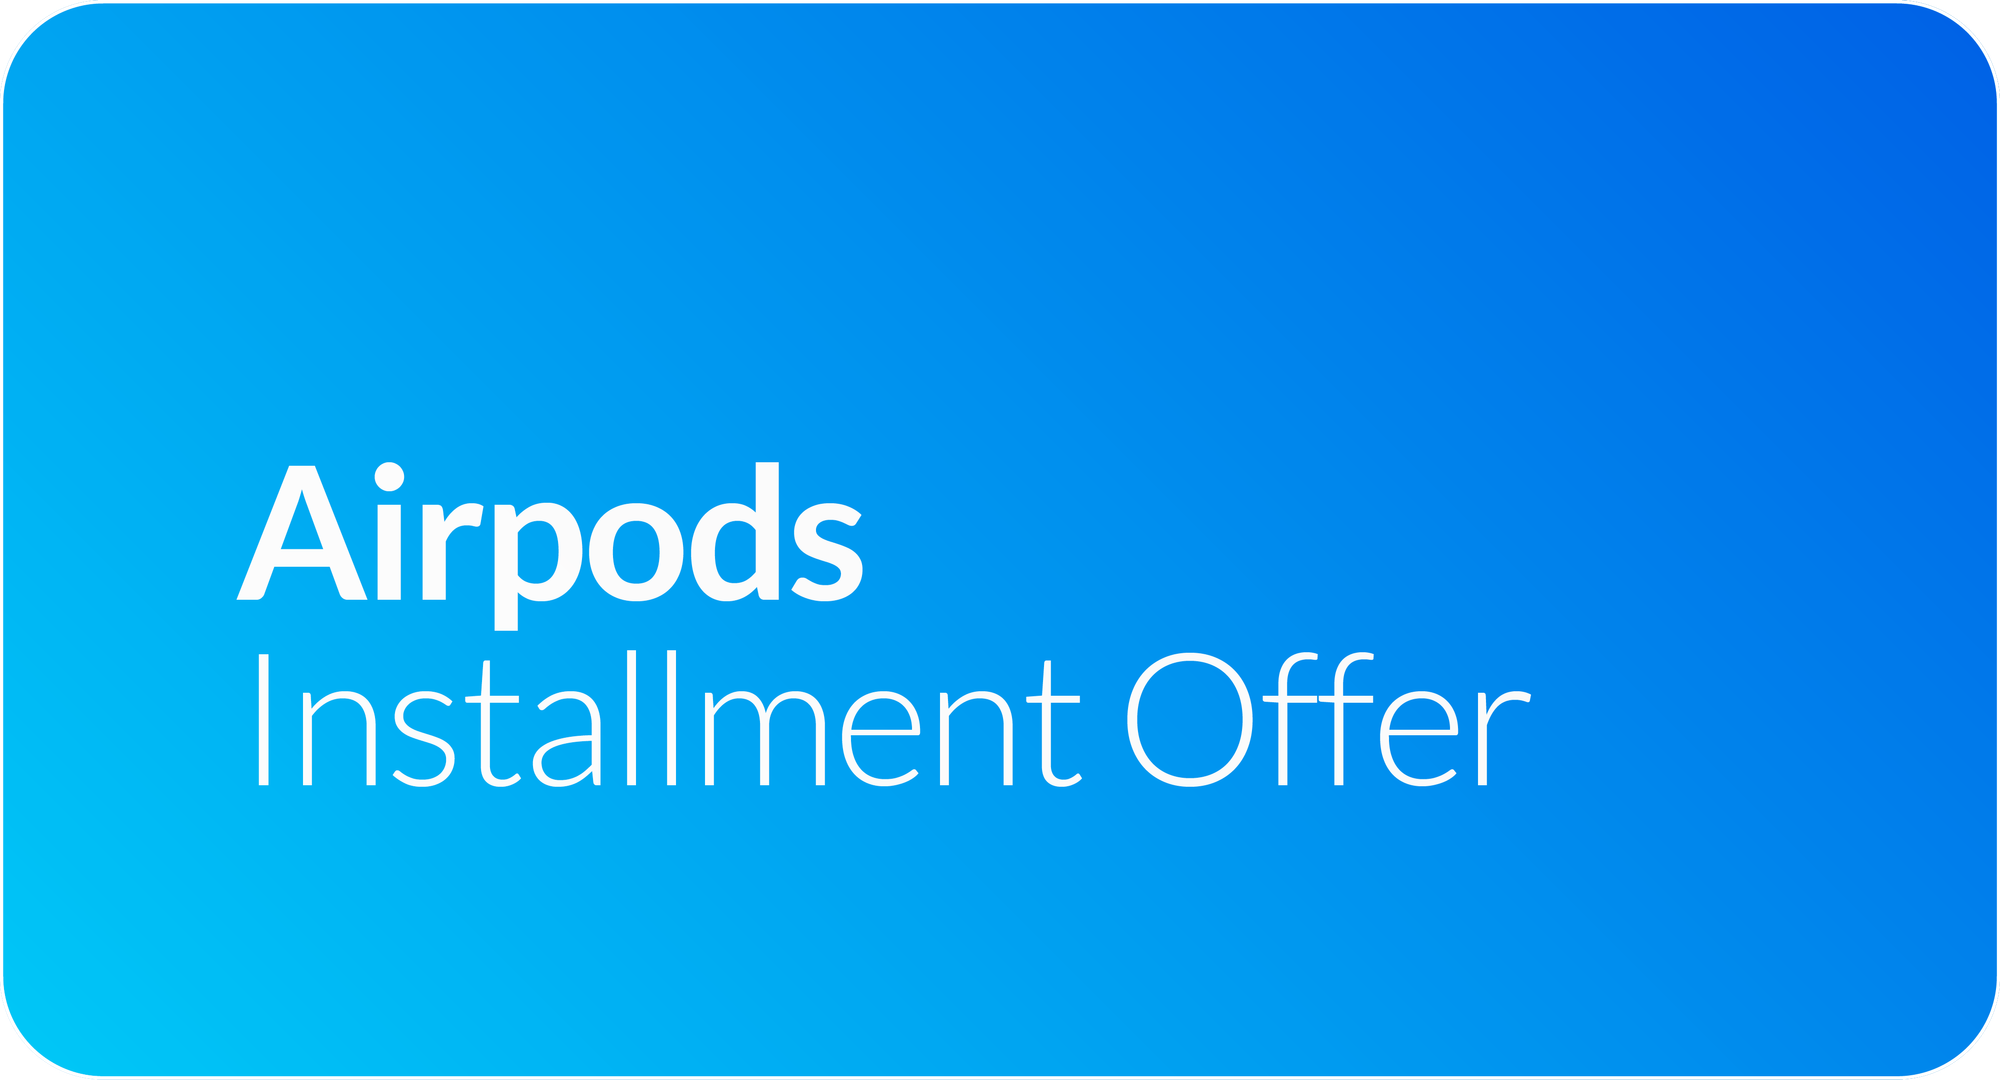 Get the best Apple deal with easy payment options for AirPods!